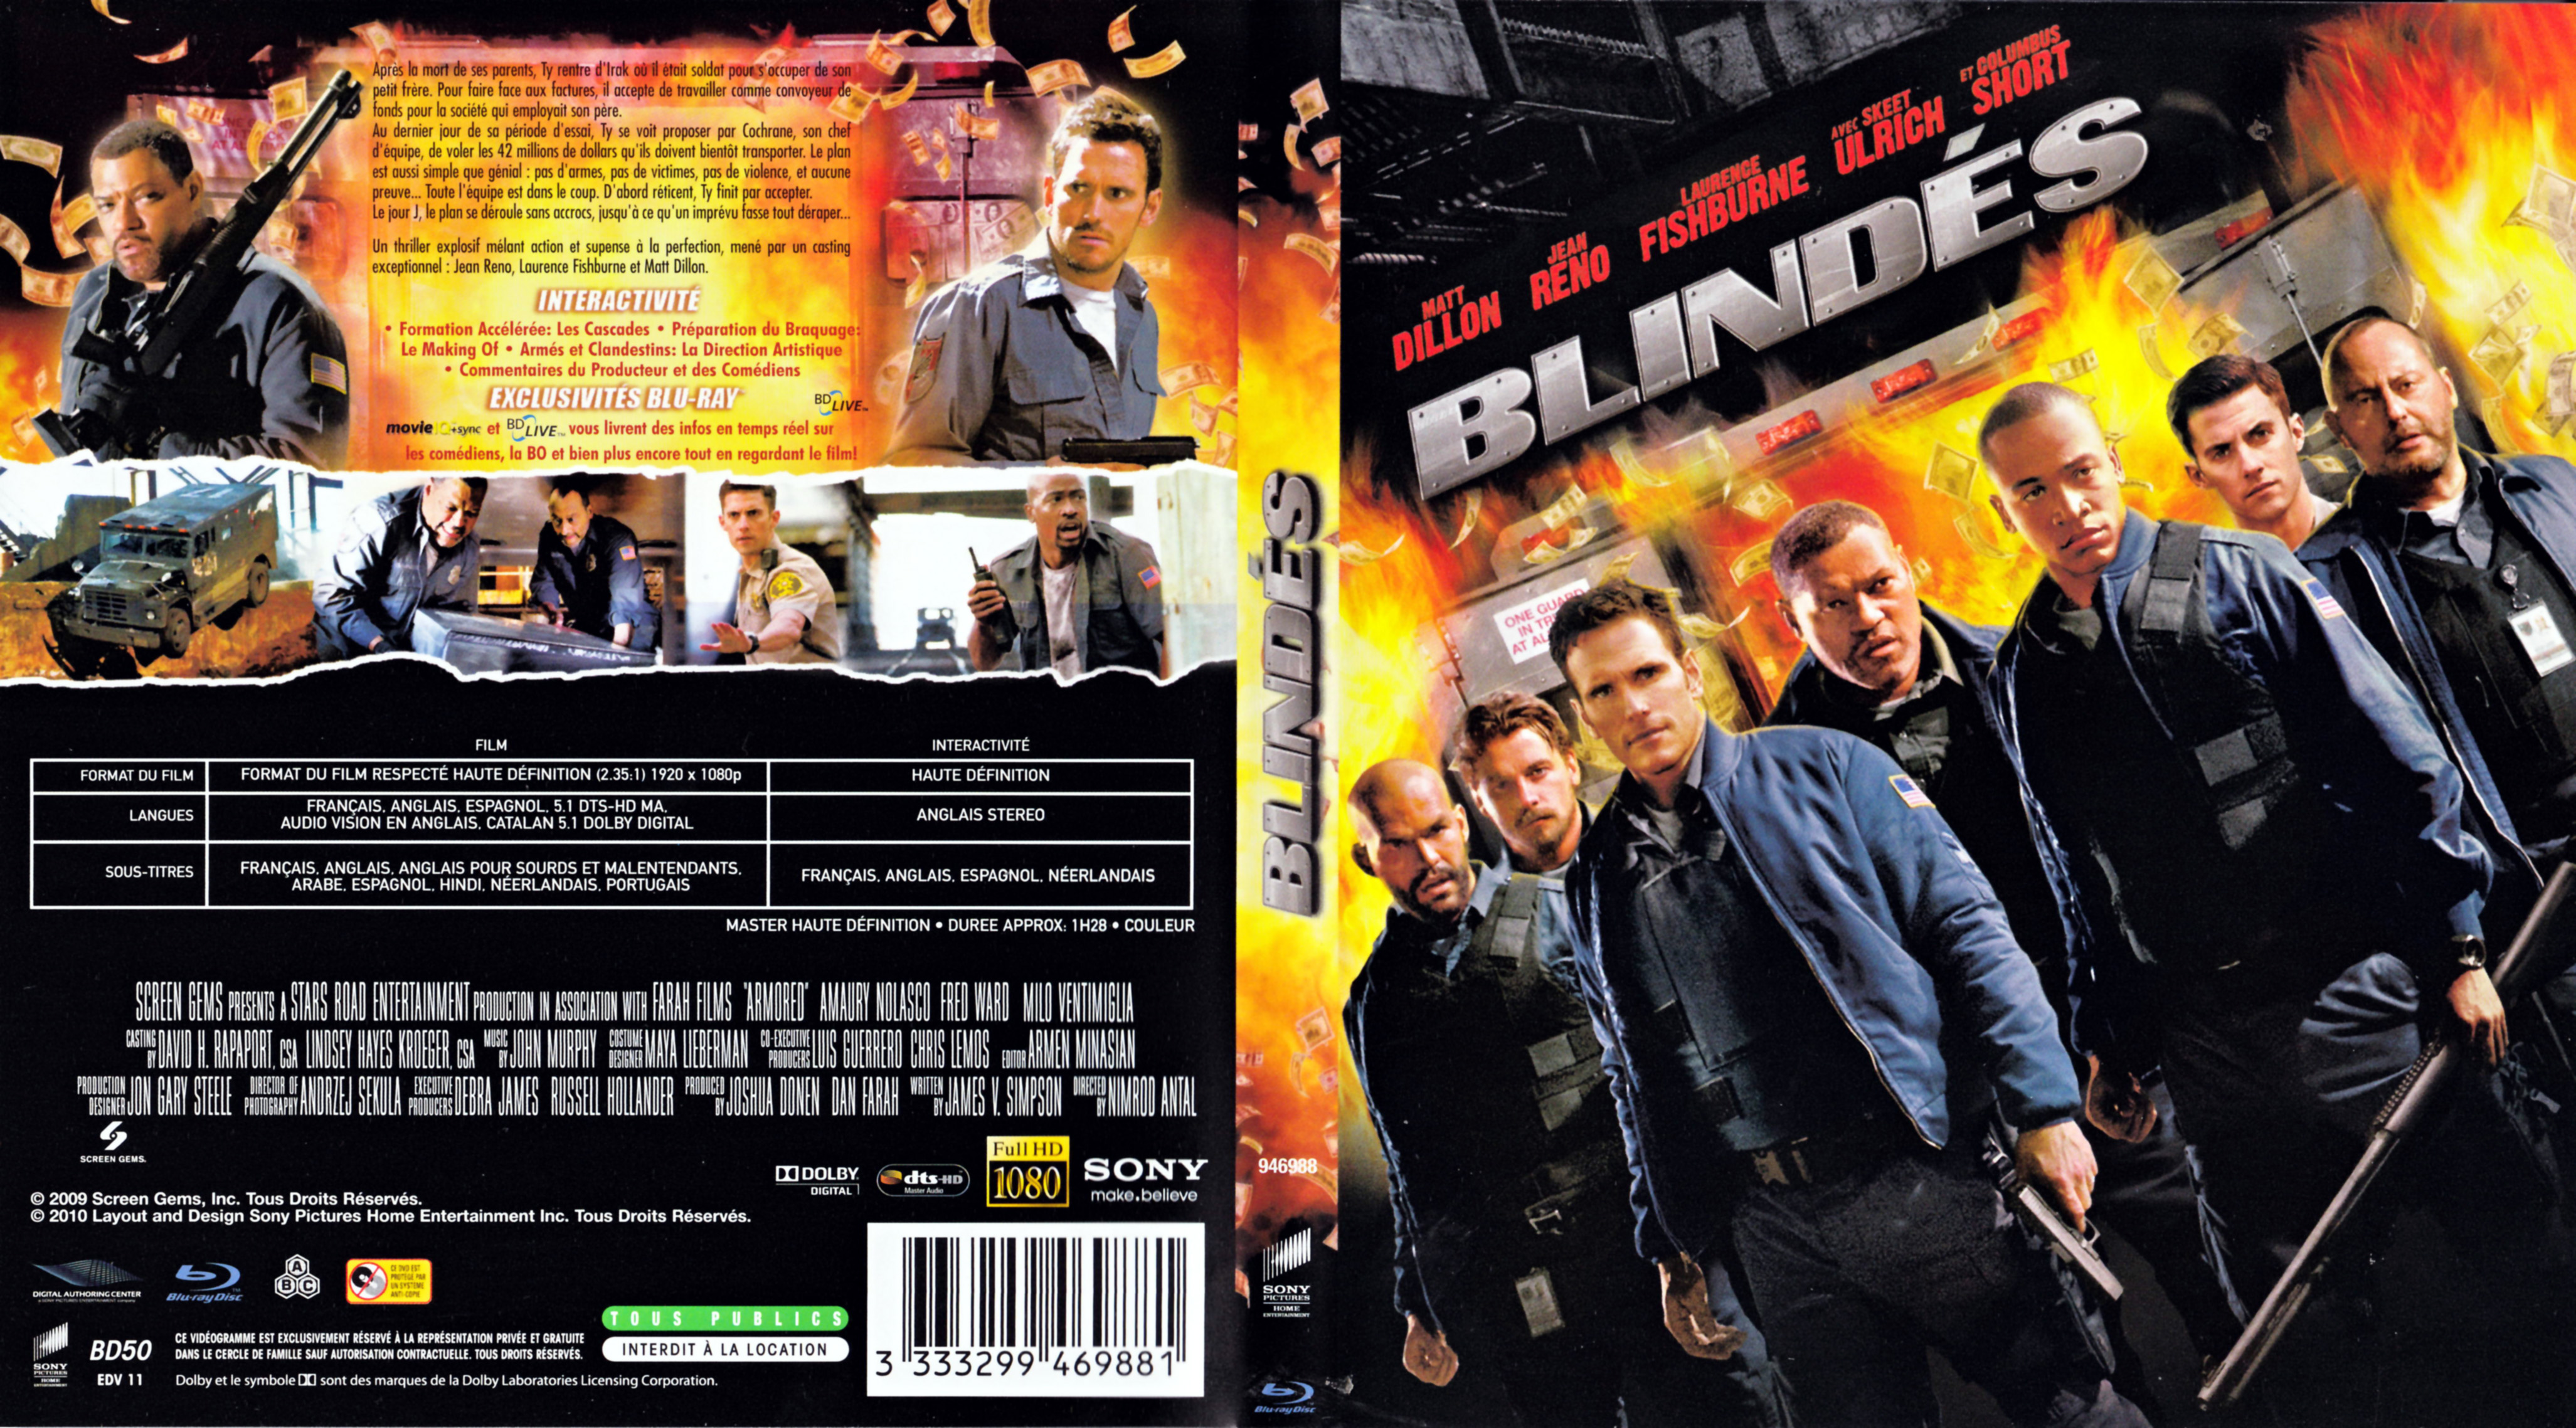 Jaquette DVD Blindes (BLU-RAY)